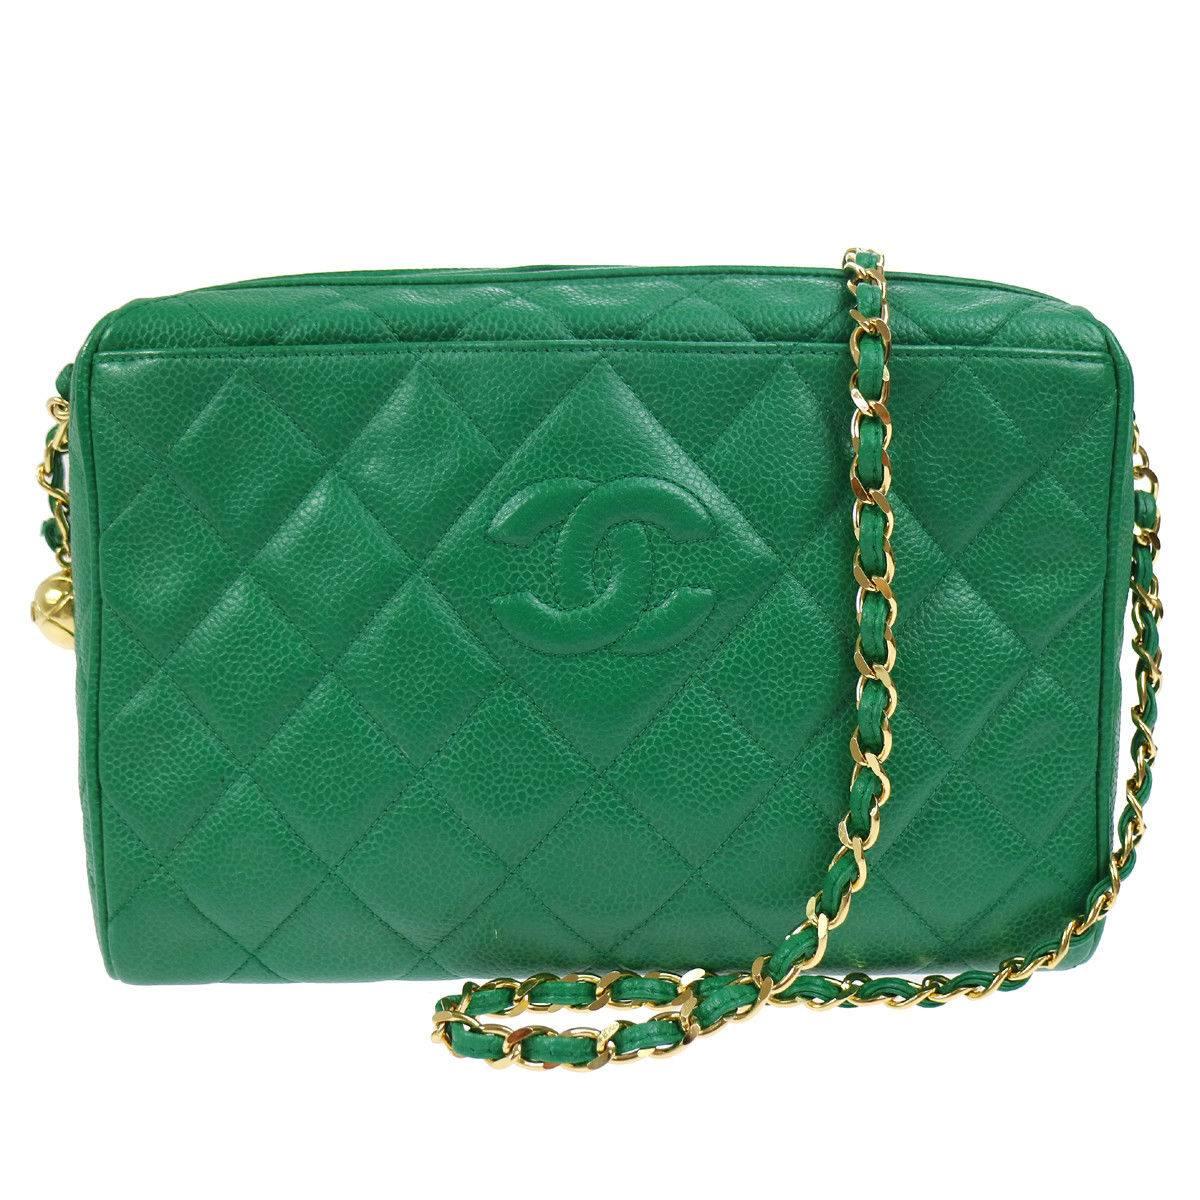 Chanel Green Quilted Caviar Leather Shoulder Bag